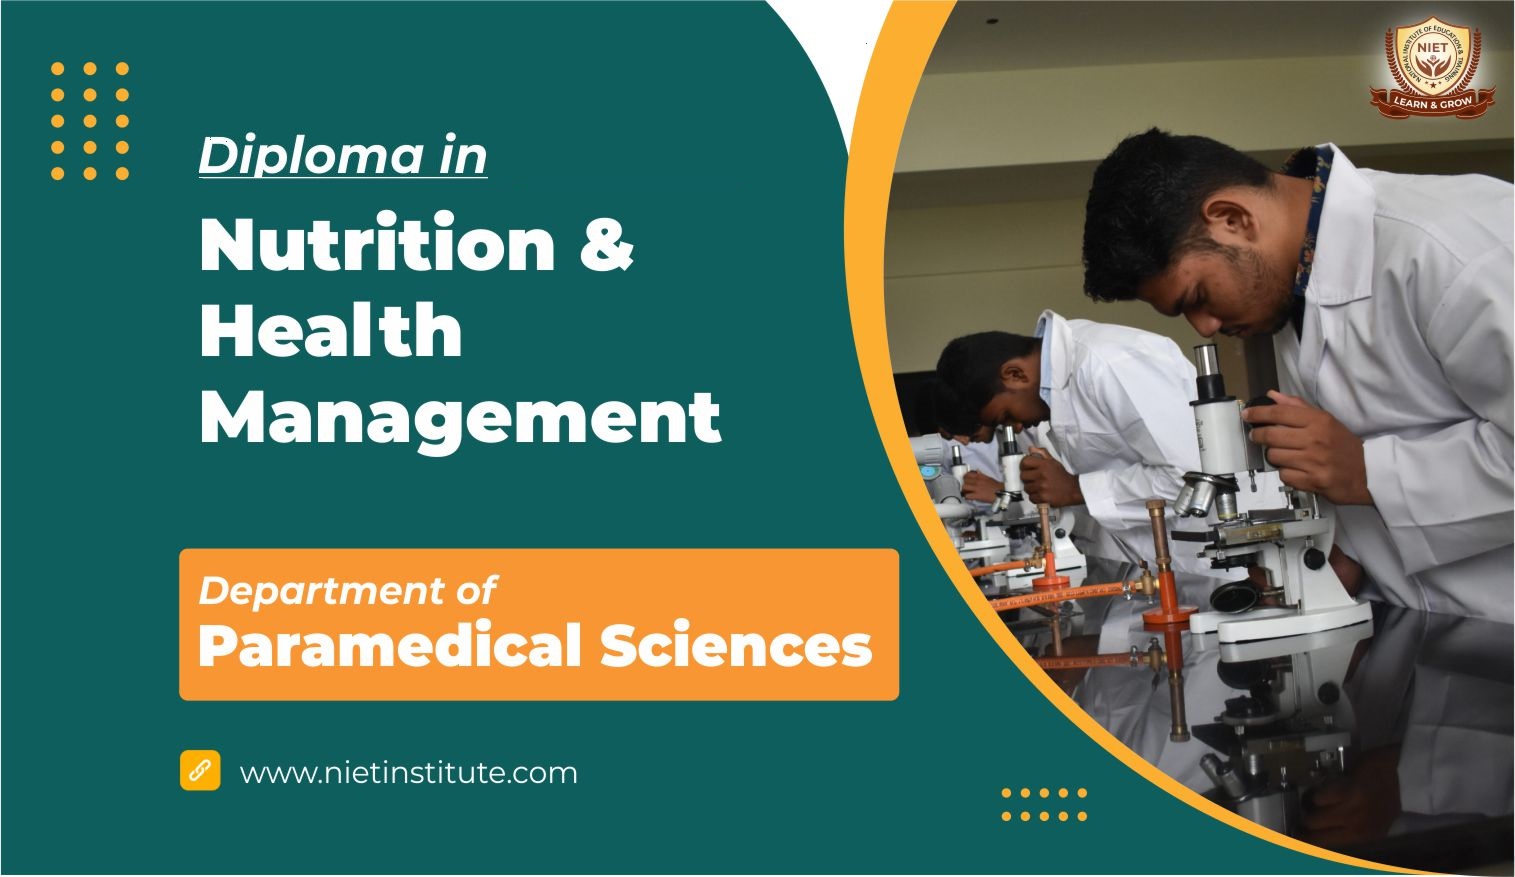 Diploma in Nutrition & Health Management